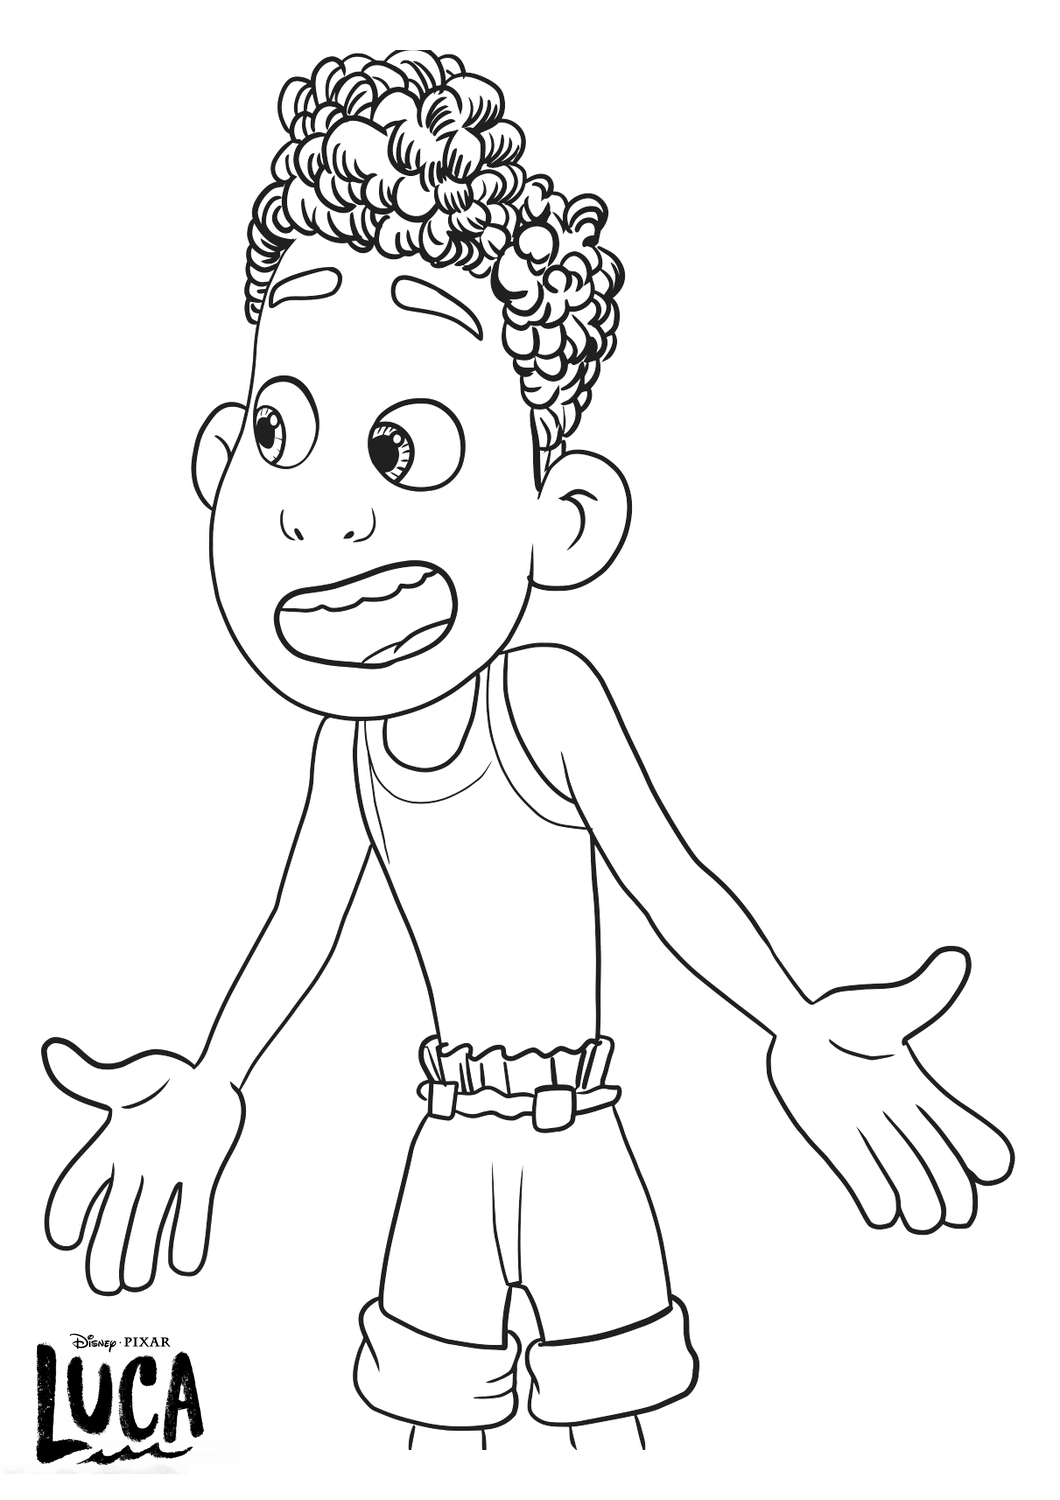 Cool Luca 7 Coloring Page